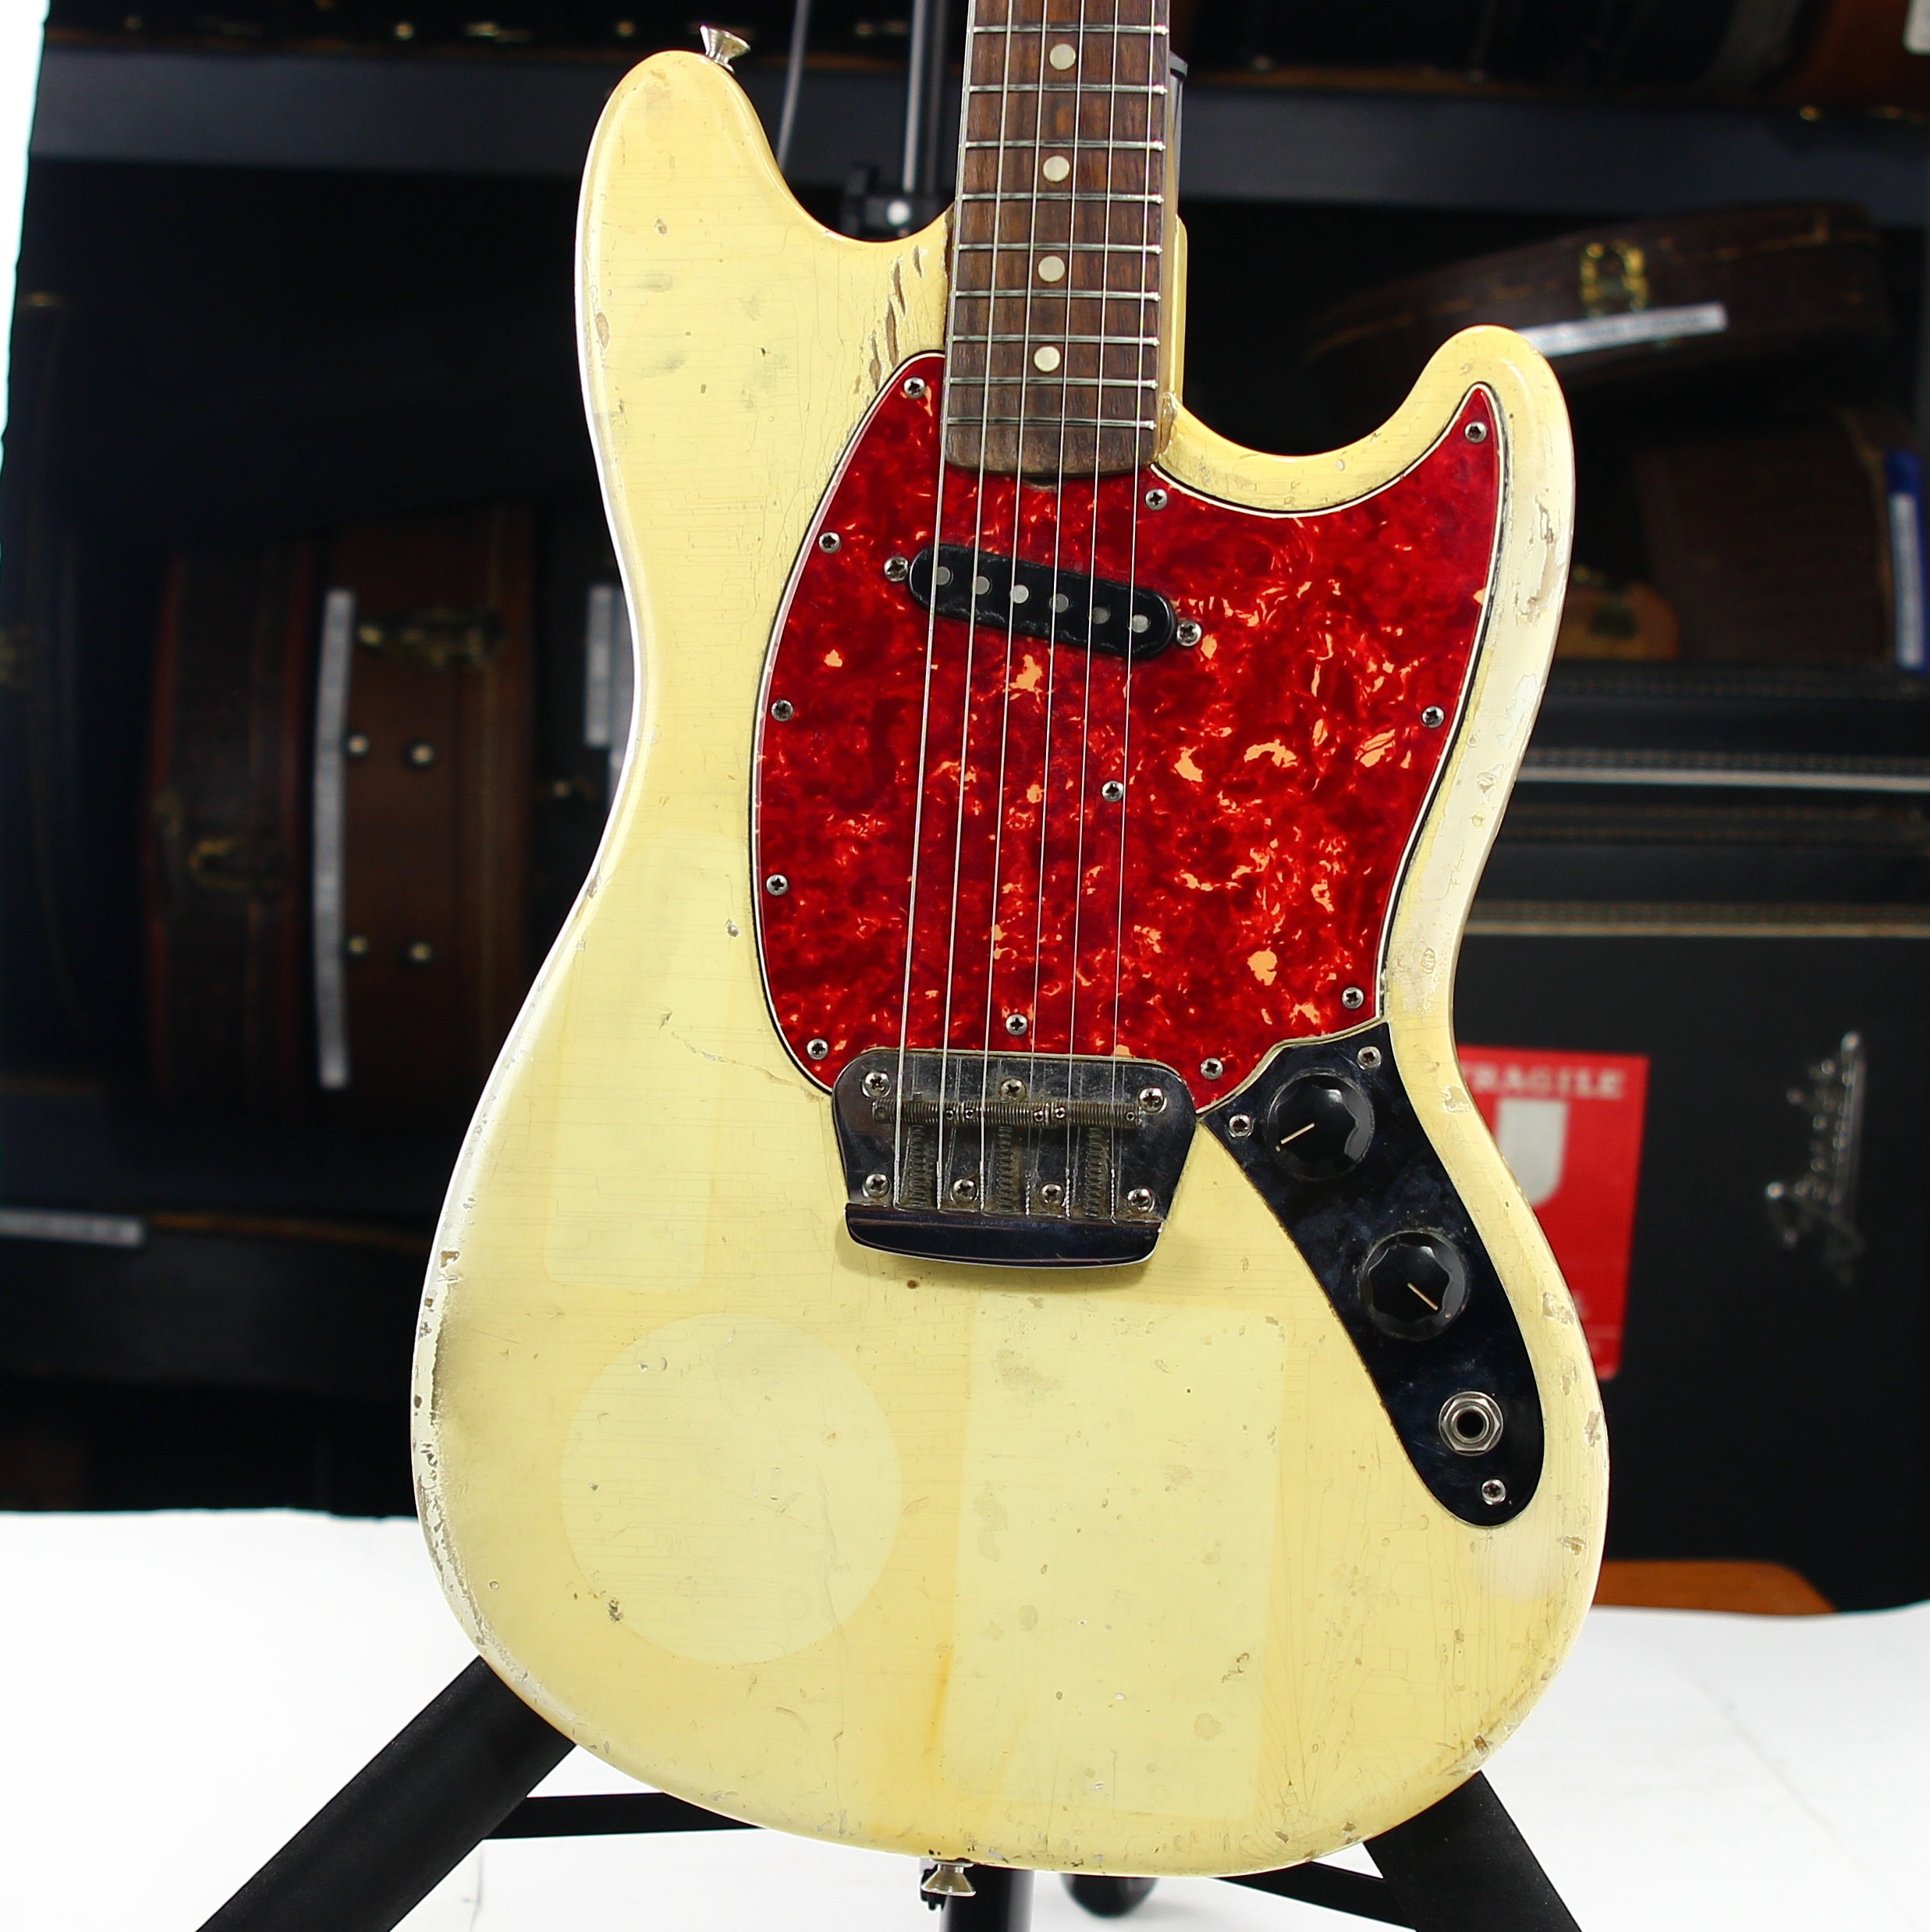 *SOLD*  1965 Fender Slab Board Musicmaster II Olympic White - Tortoise Guard, Player-Grade, Plays Awesome!